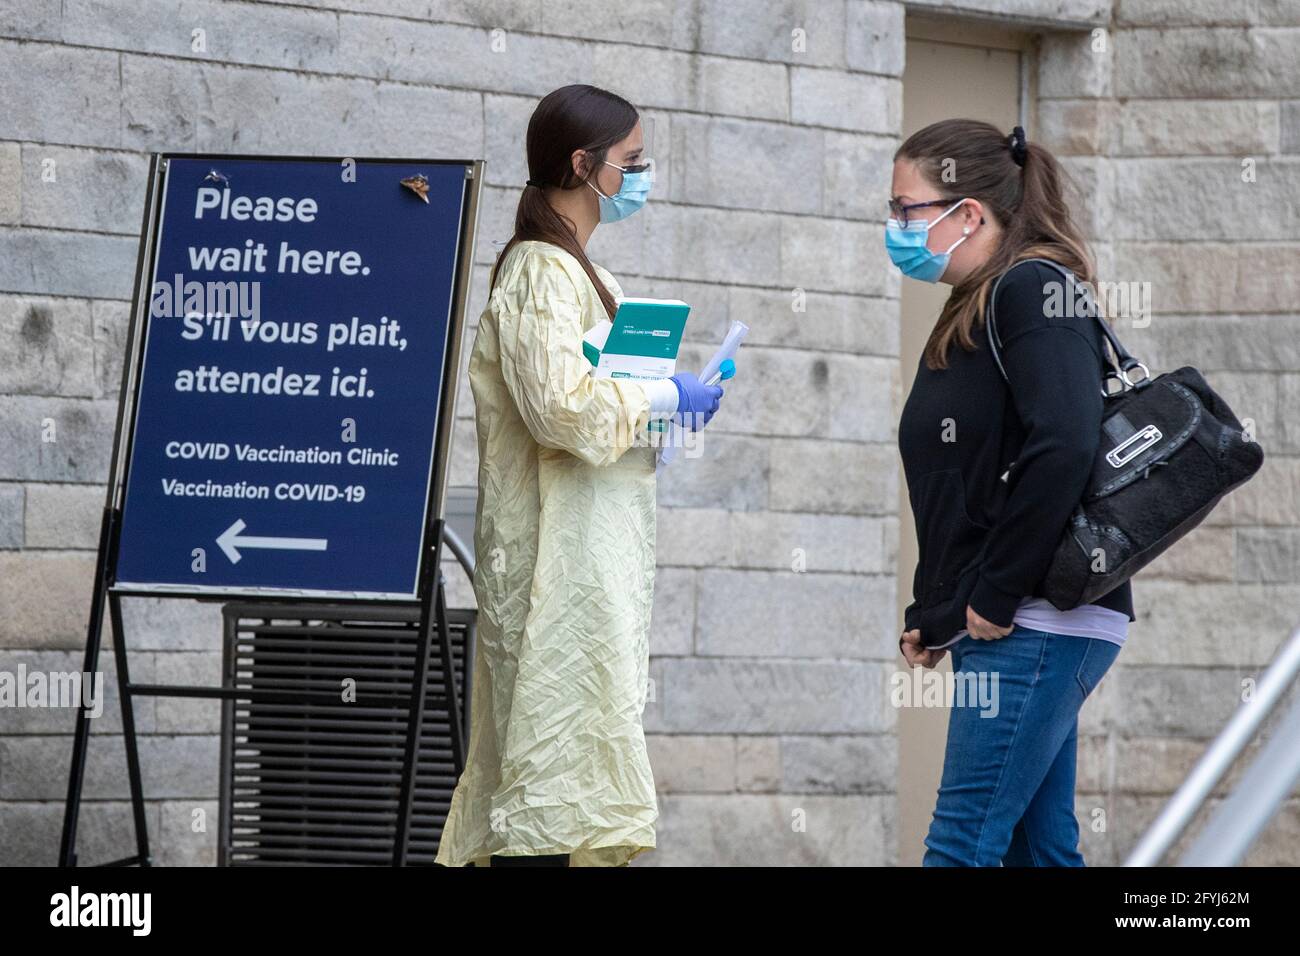 A person in PPE (Personal protective equipment) speaks with a person outside a COVID-19 vaccine clinic at Kingston general hospital (KGH) in Kingston, Stock Photo